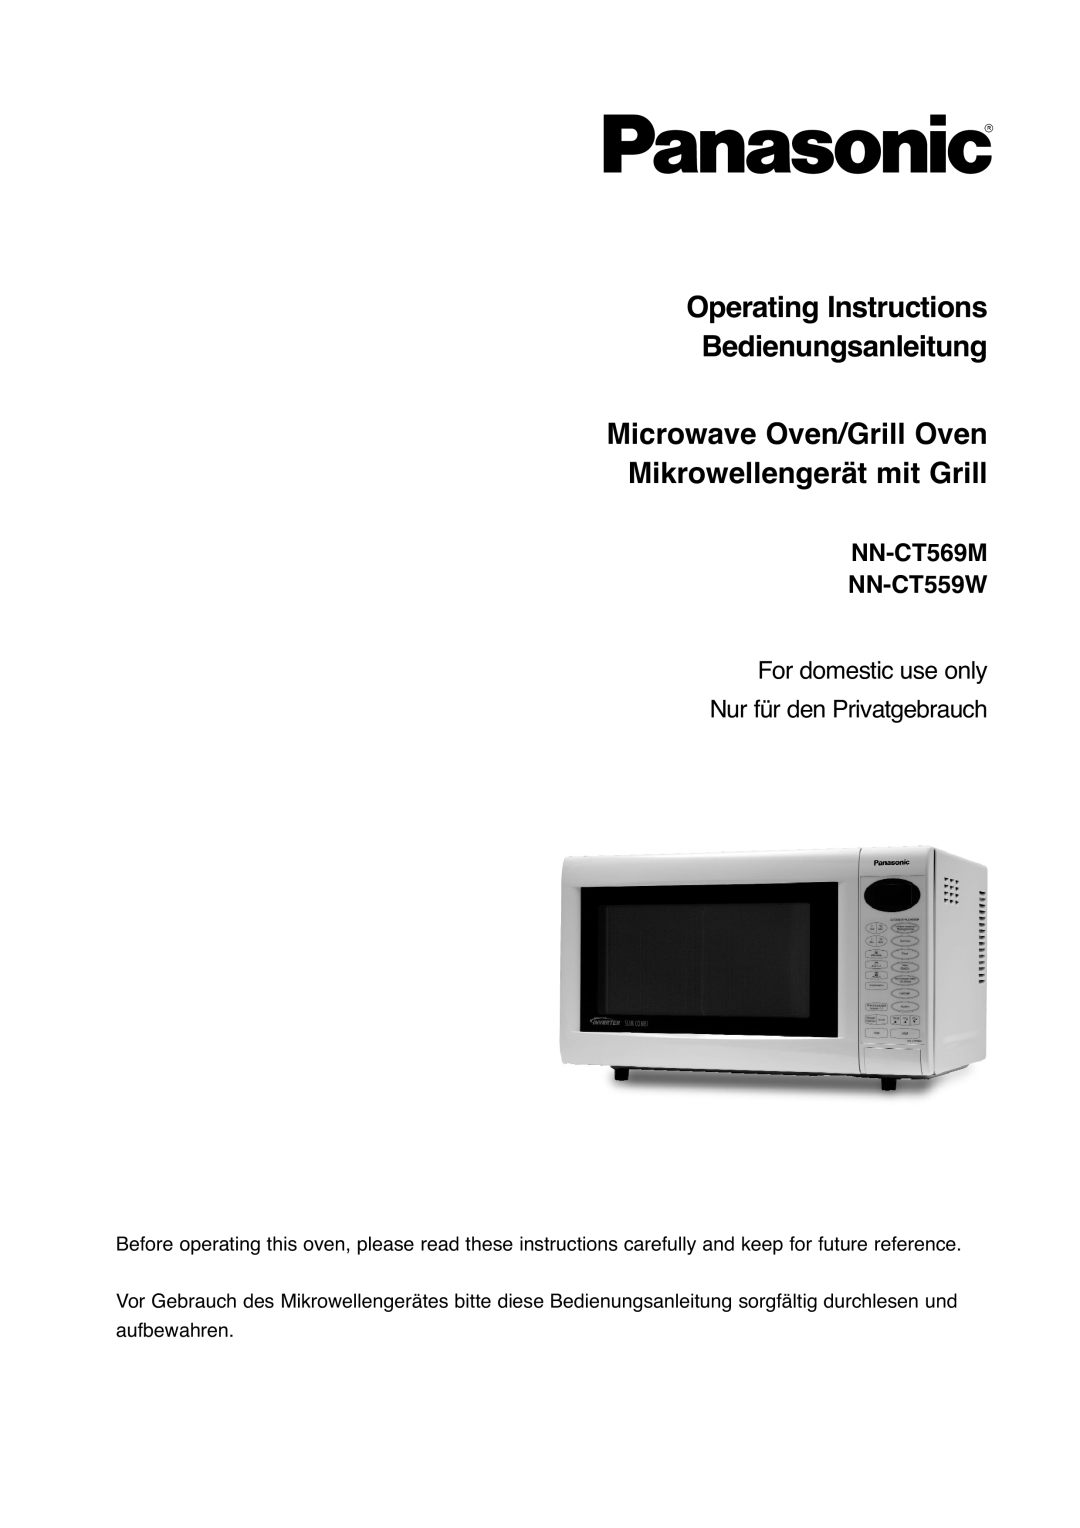 Panasonic manual Microwave Oven/Grill Oven Mikrowellengerät mit Grill, NN-CT569M NN-CT559W 